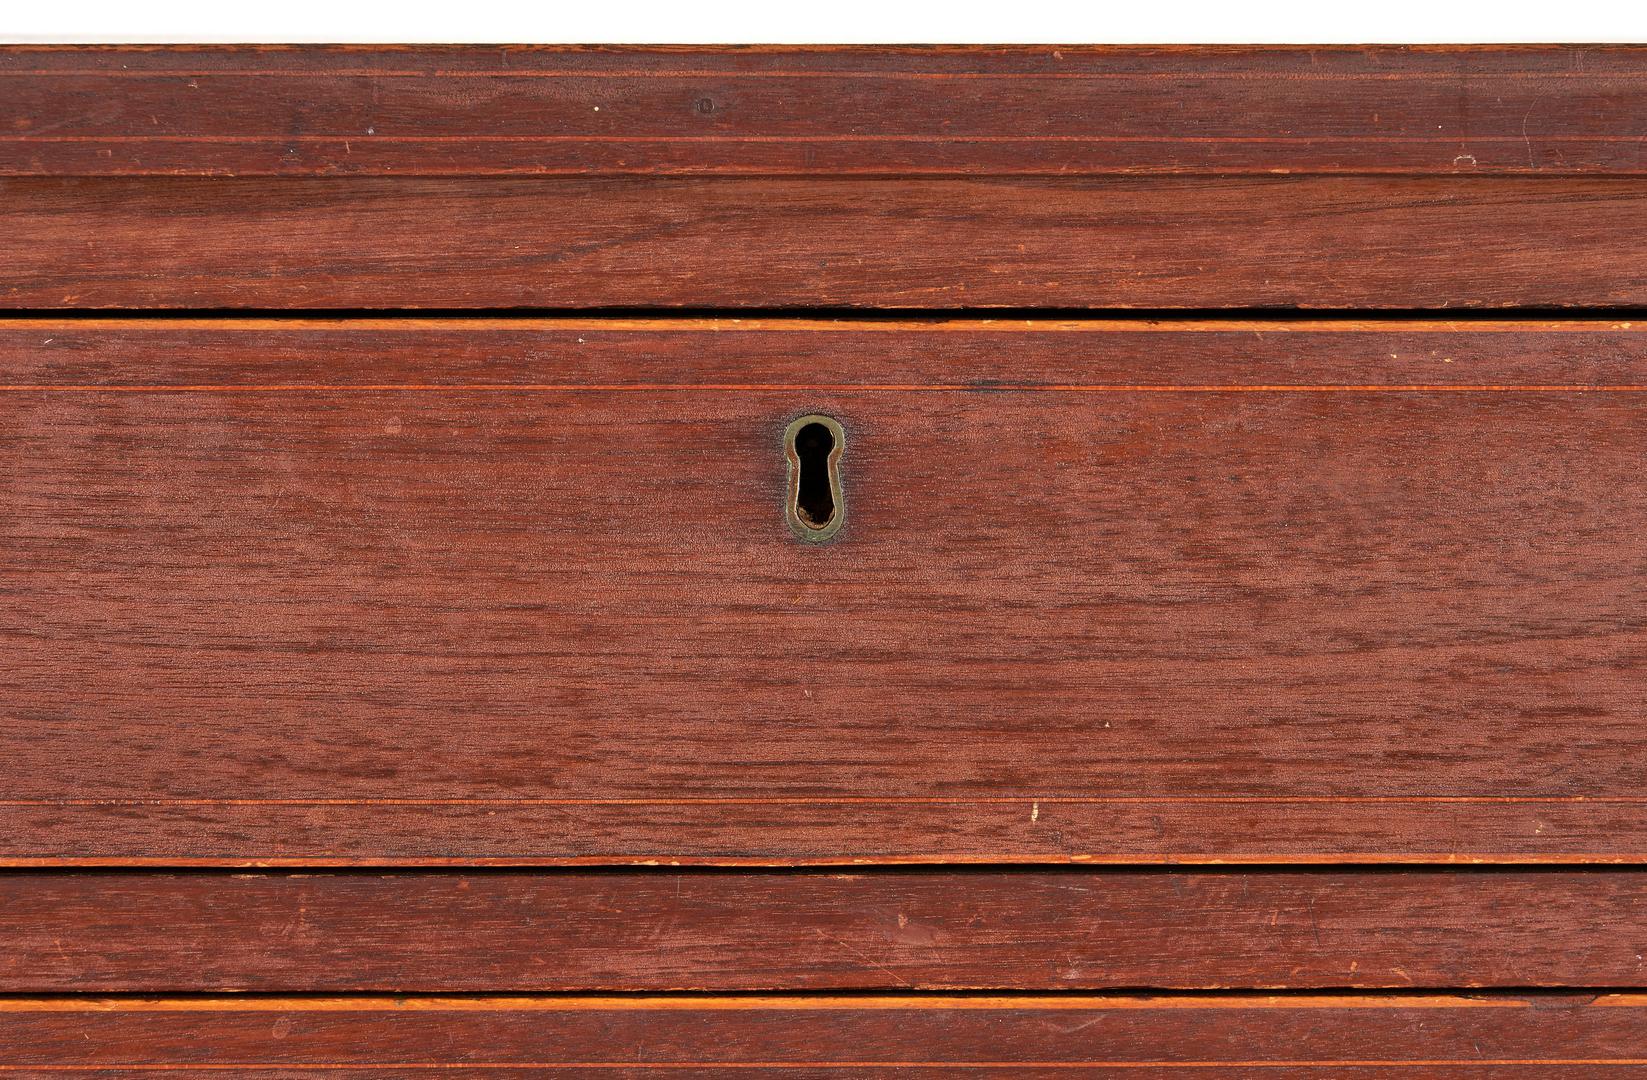 Federal Inlaid Hepplewhite Chest of Drawers - Image 7 of 28